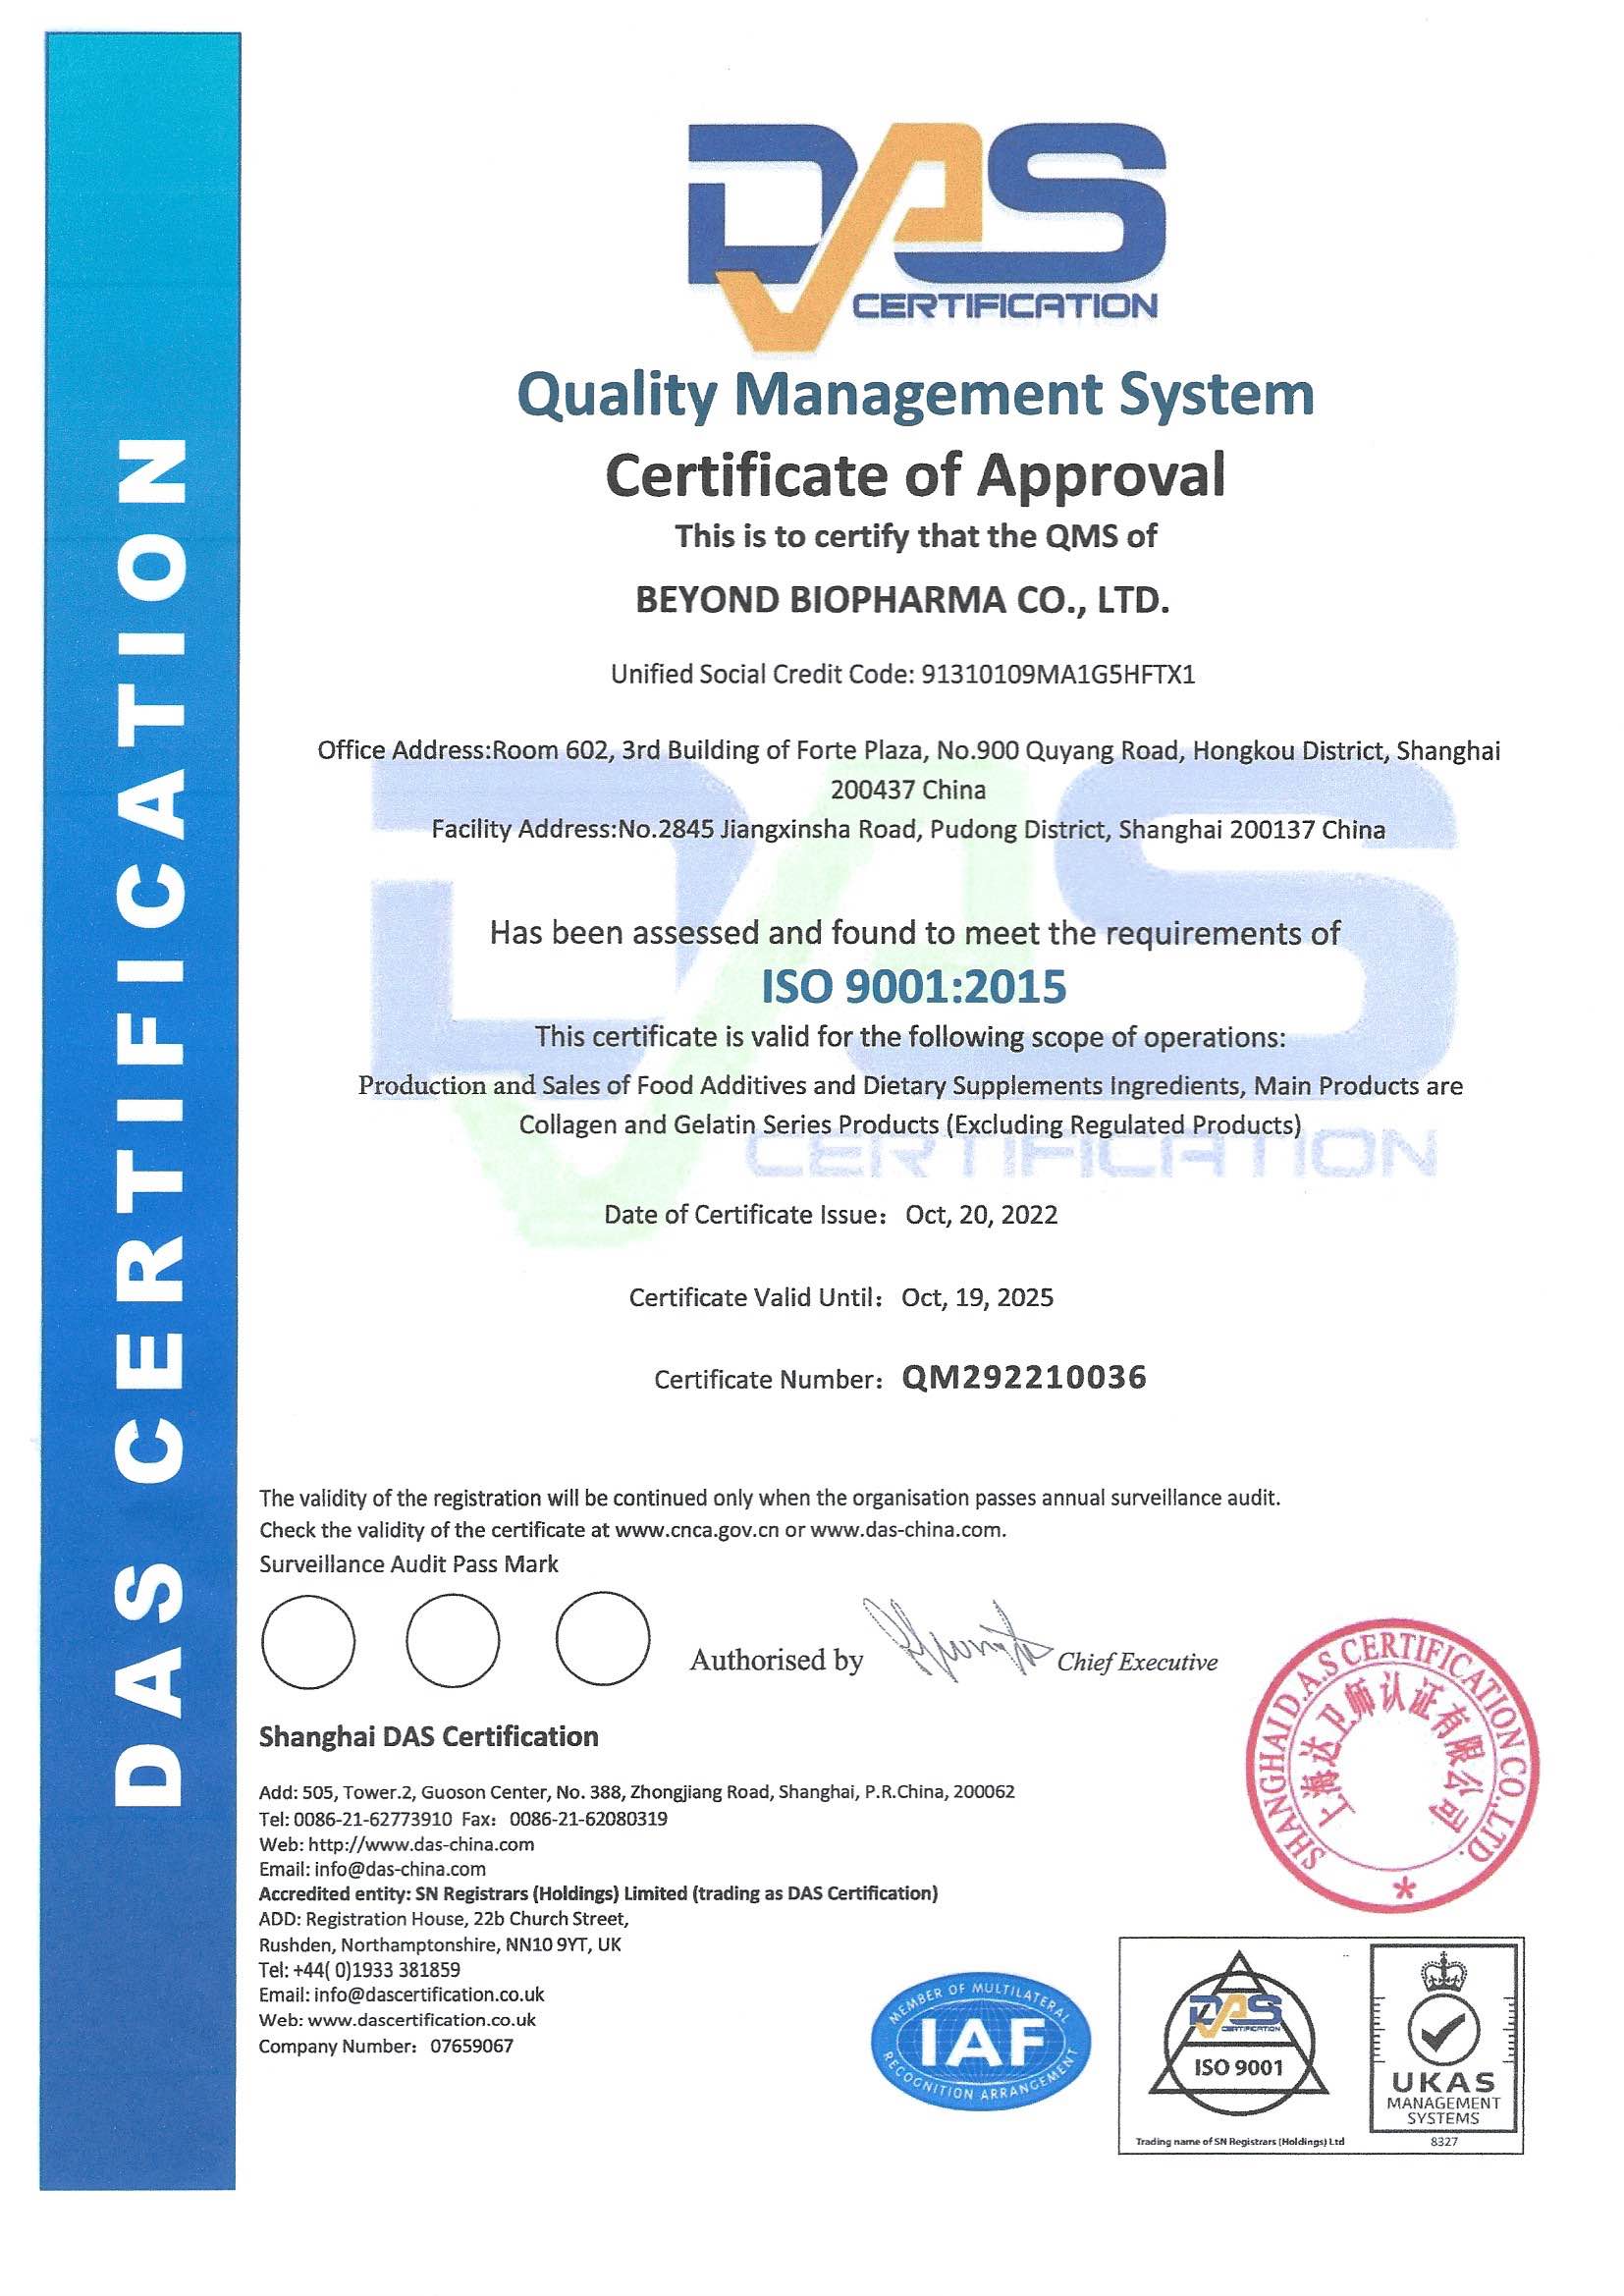 Congratulate our company successfully upgrade ISO 9001:2015 quality management system certification certificate